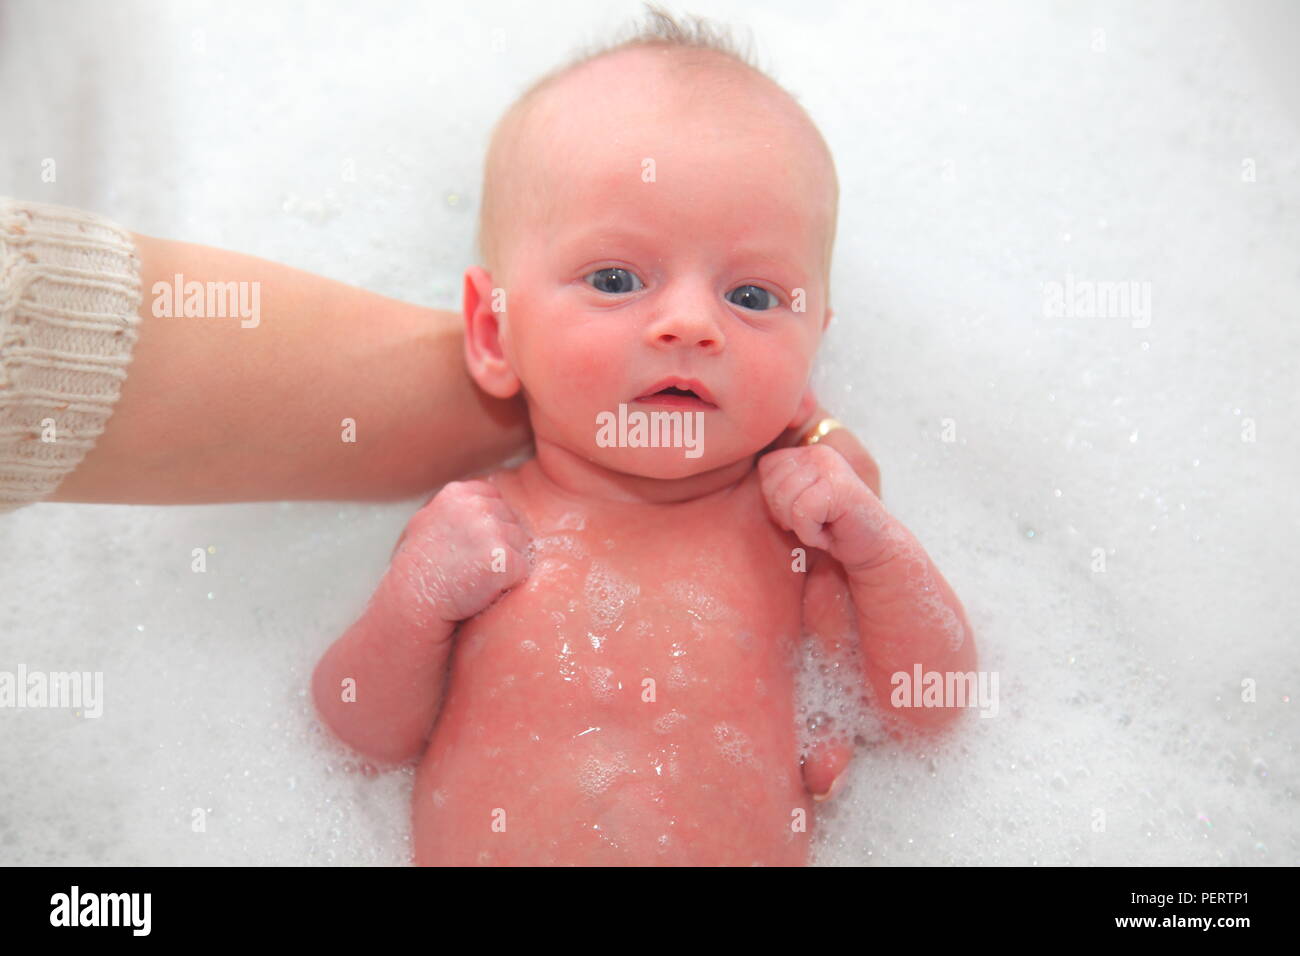 A newborn baby has a bath for the first time a few days after being born. Stock Photo